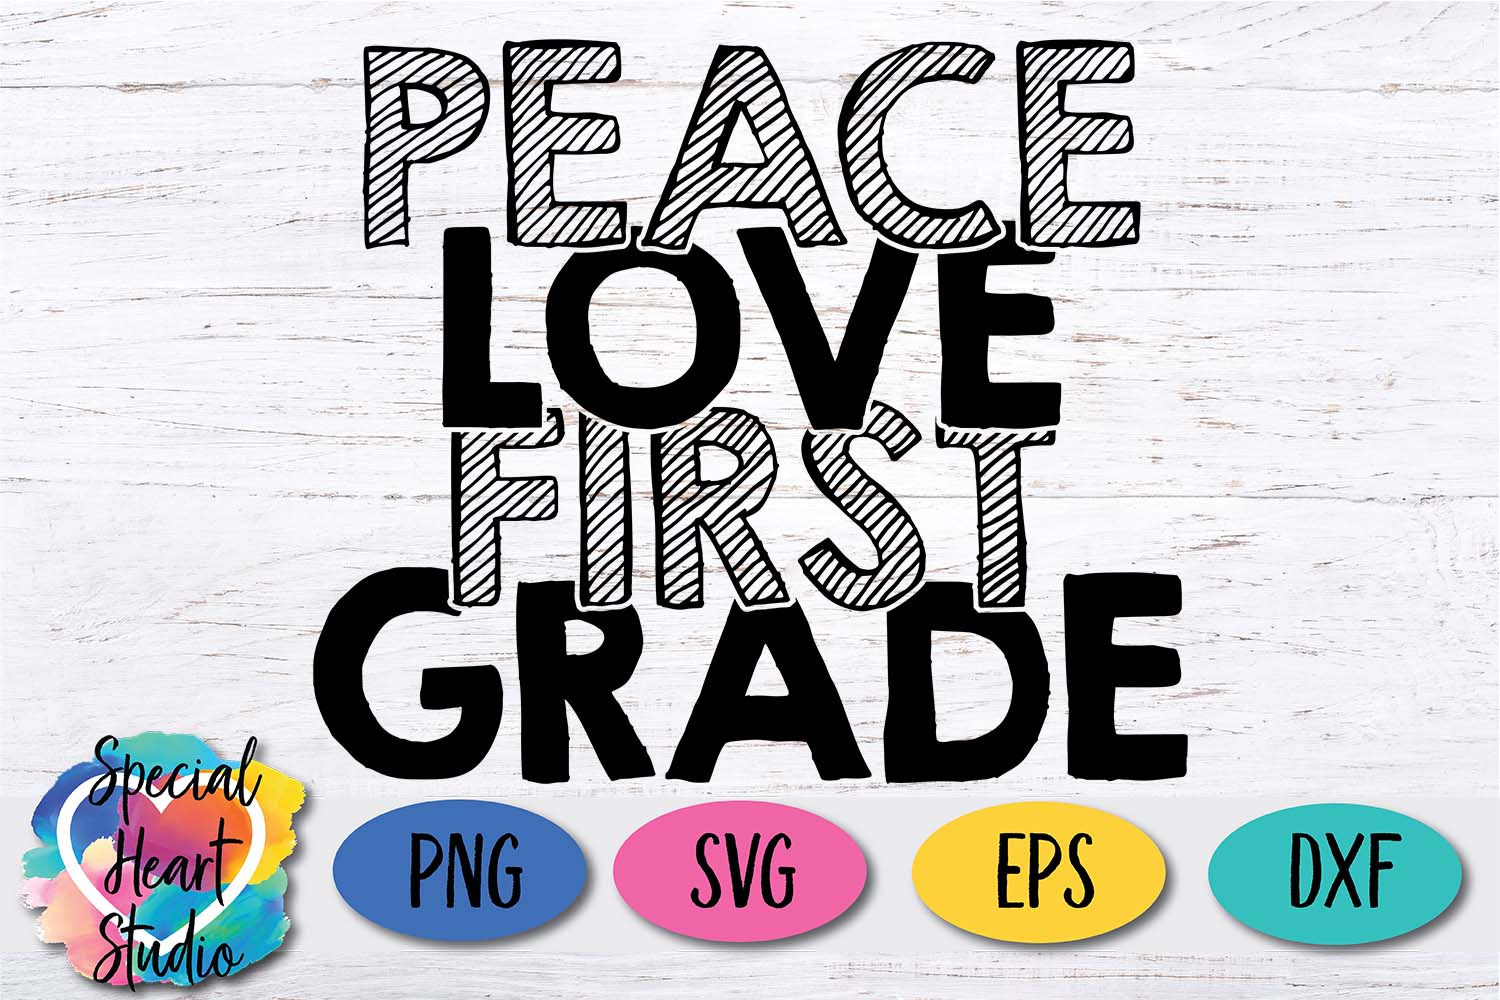 Peace Love First Grade - Special Heart Studio - Cut files, Crafts and Fun